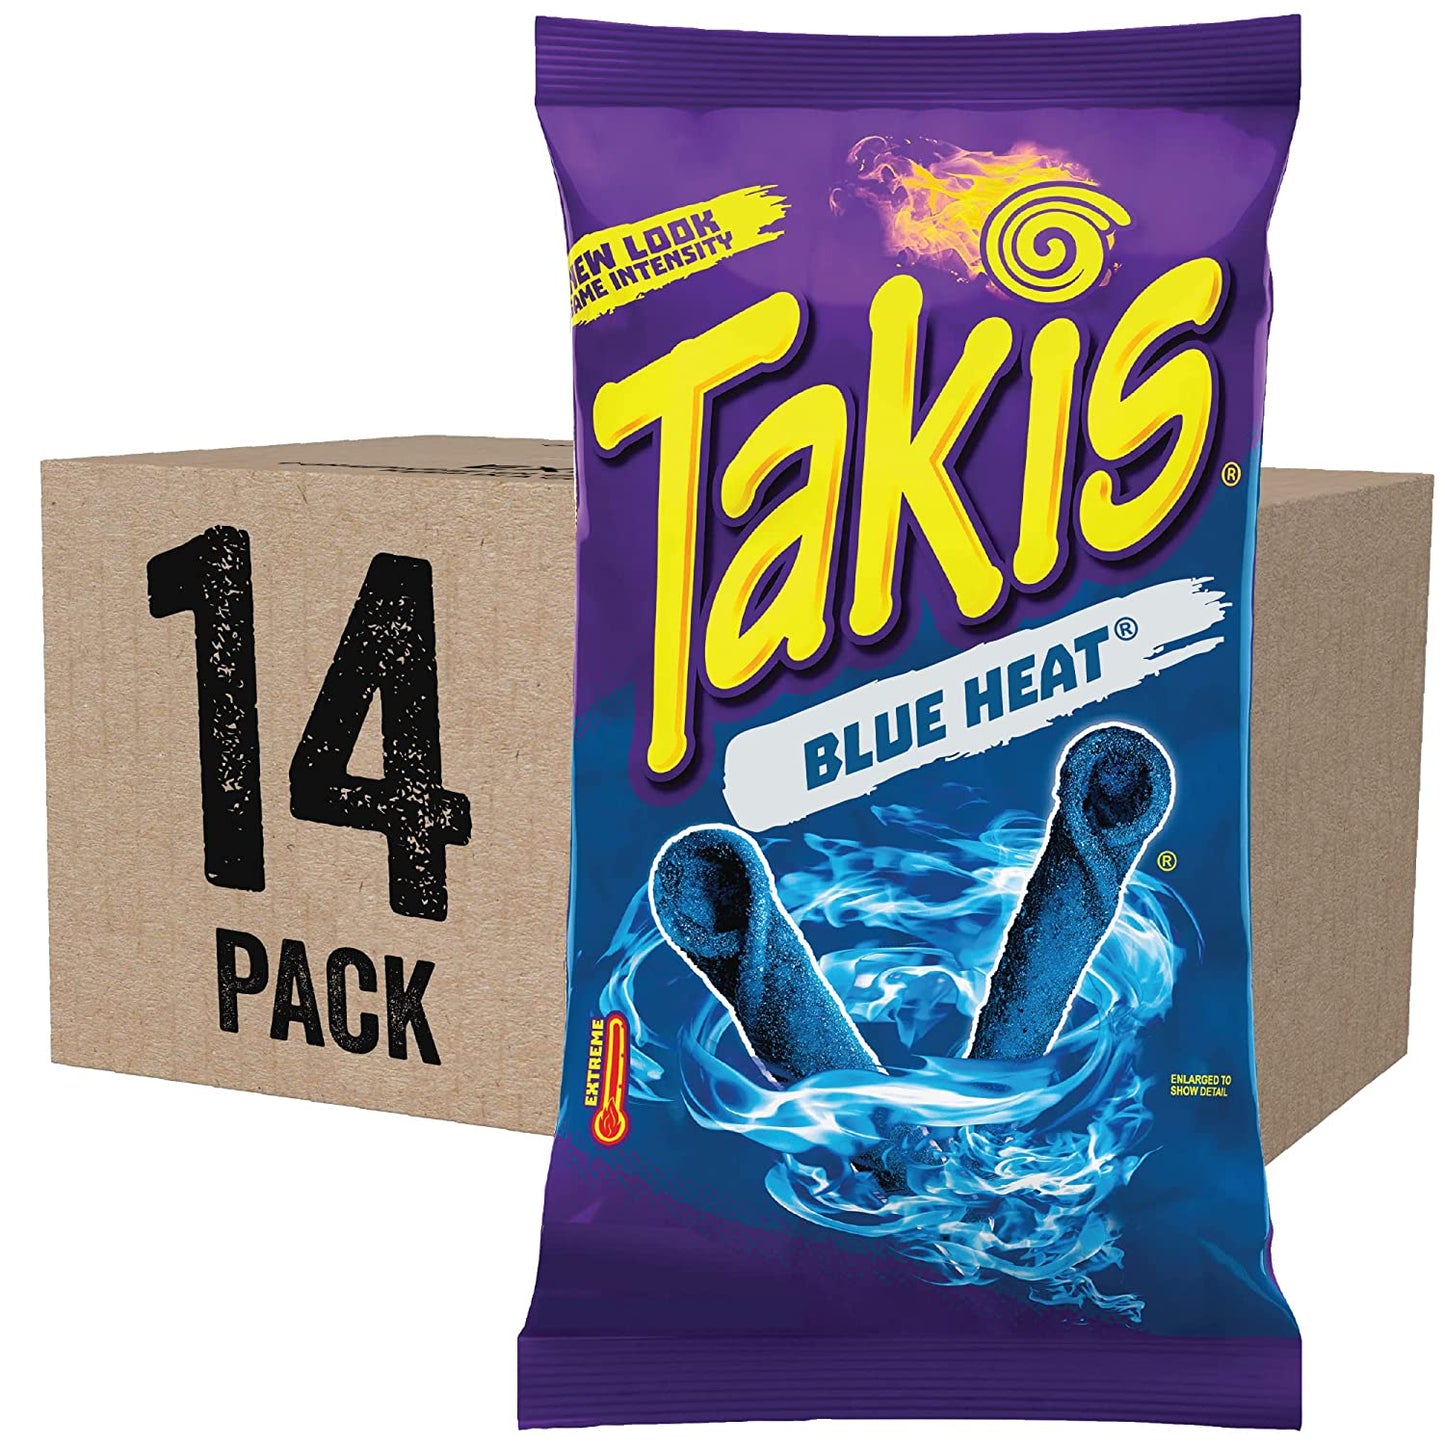 Takis Blue Heat Rolled Tortilla Chips, Hot Chili Pepper , Multipack Box with 14 Bags of 9.9 Ounces, Net  8 Pounds 10.6 Oz